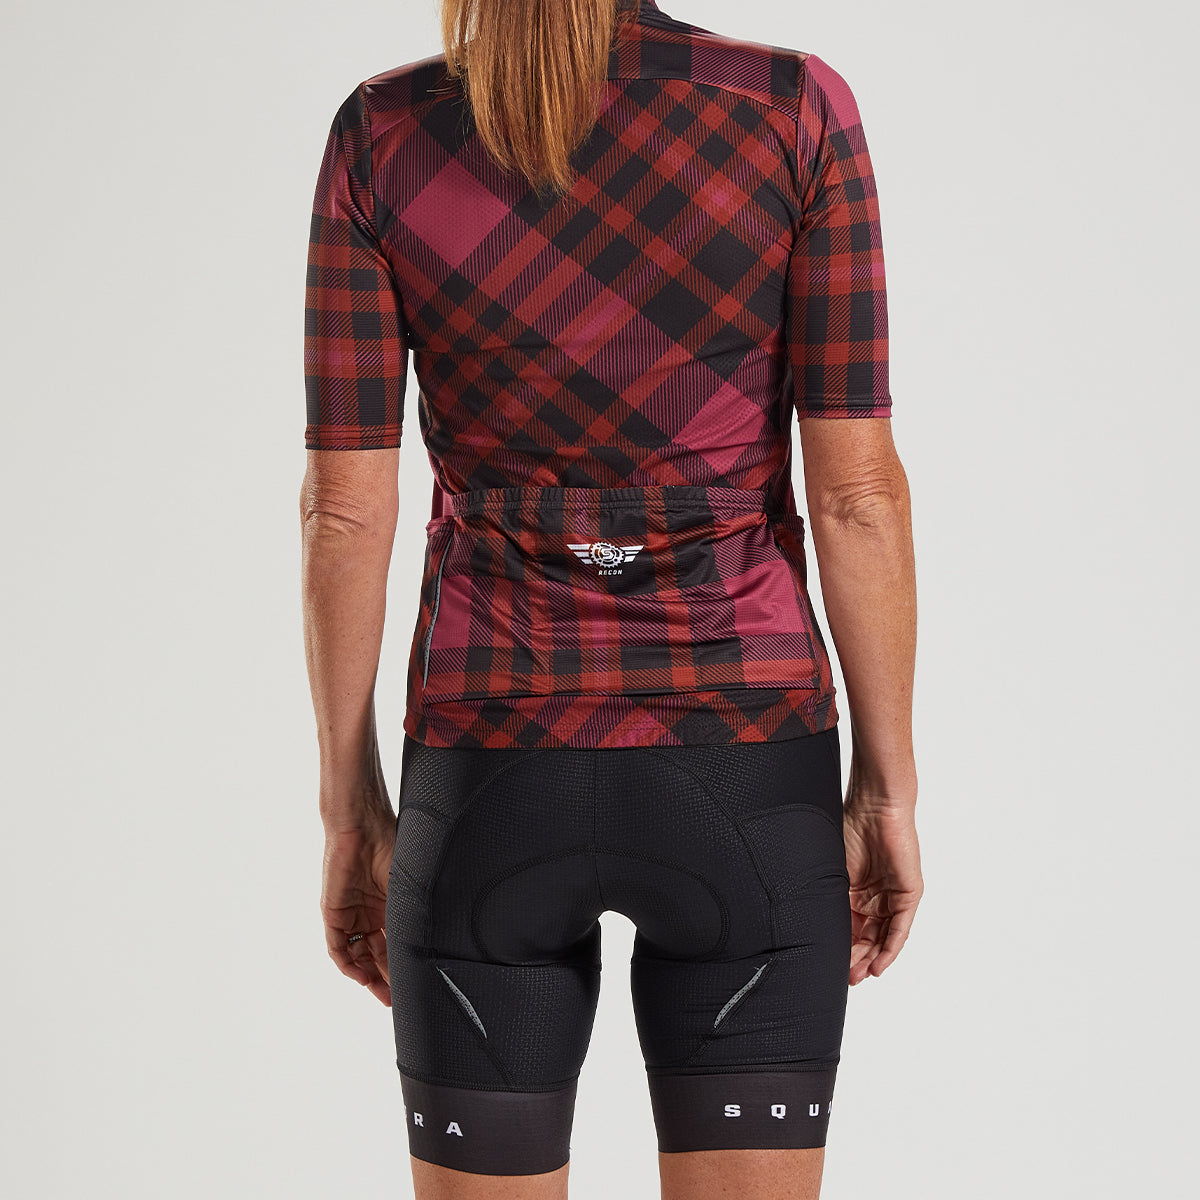 WOMENS RECON CYCLE JERSEY - BORDEAUX